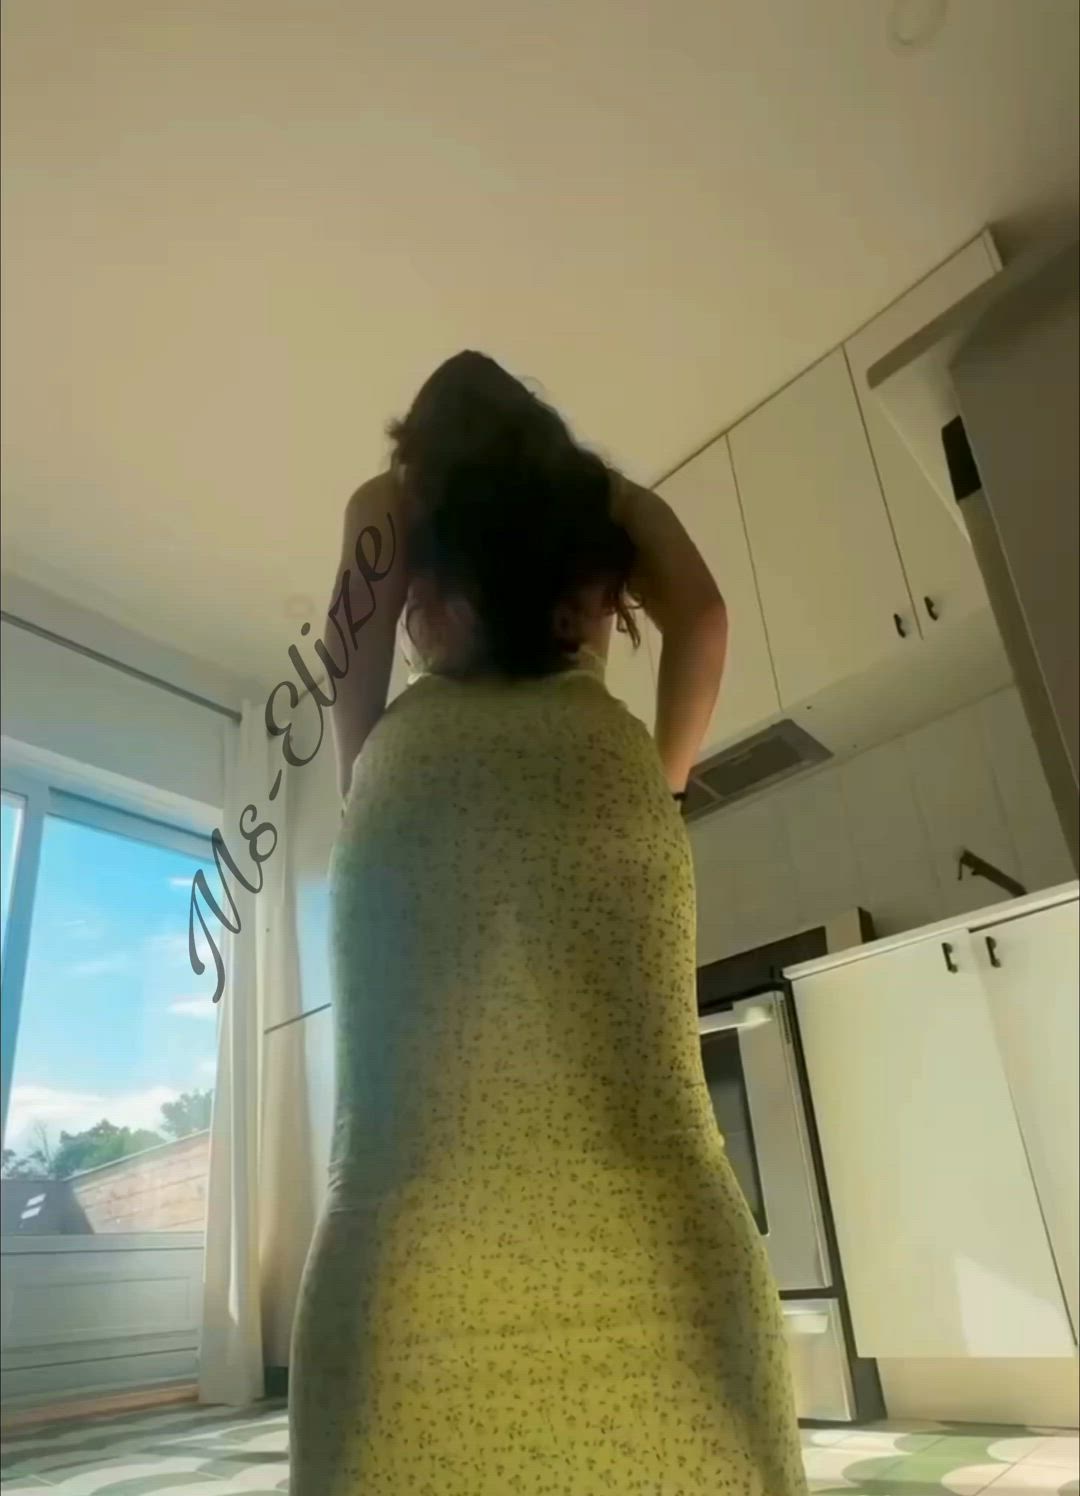 Ass porn video with onlyfans model ms-elize <strong>@ms-elize</strong>